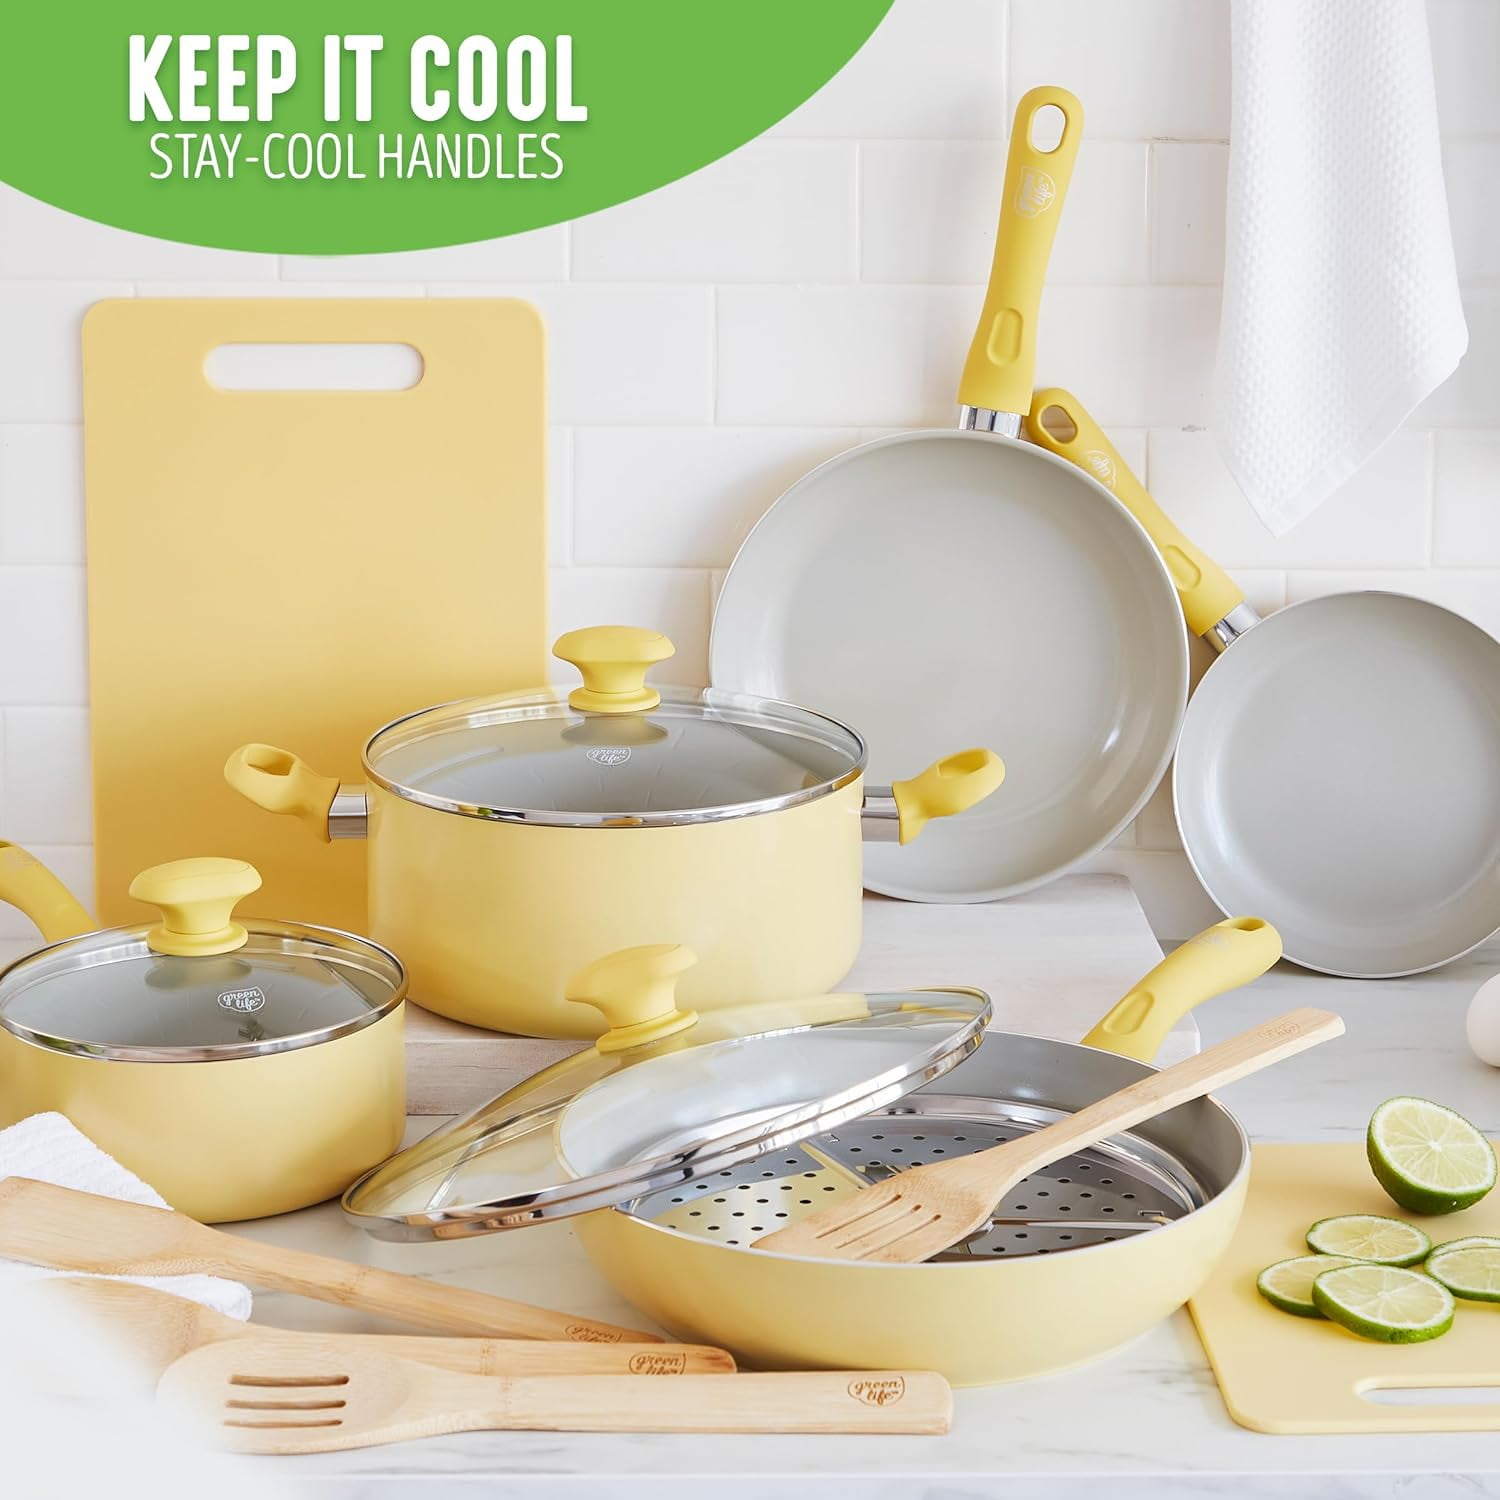 GreenLife 18-Piece Soft Grip Toxin-Free Healthy Ceramic Non-Stick Cookware  Set, Yellow, Dishwasher Safe